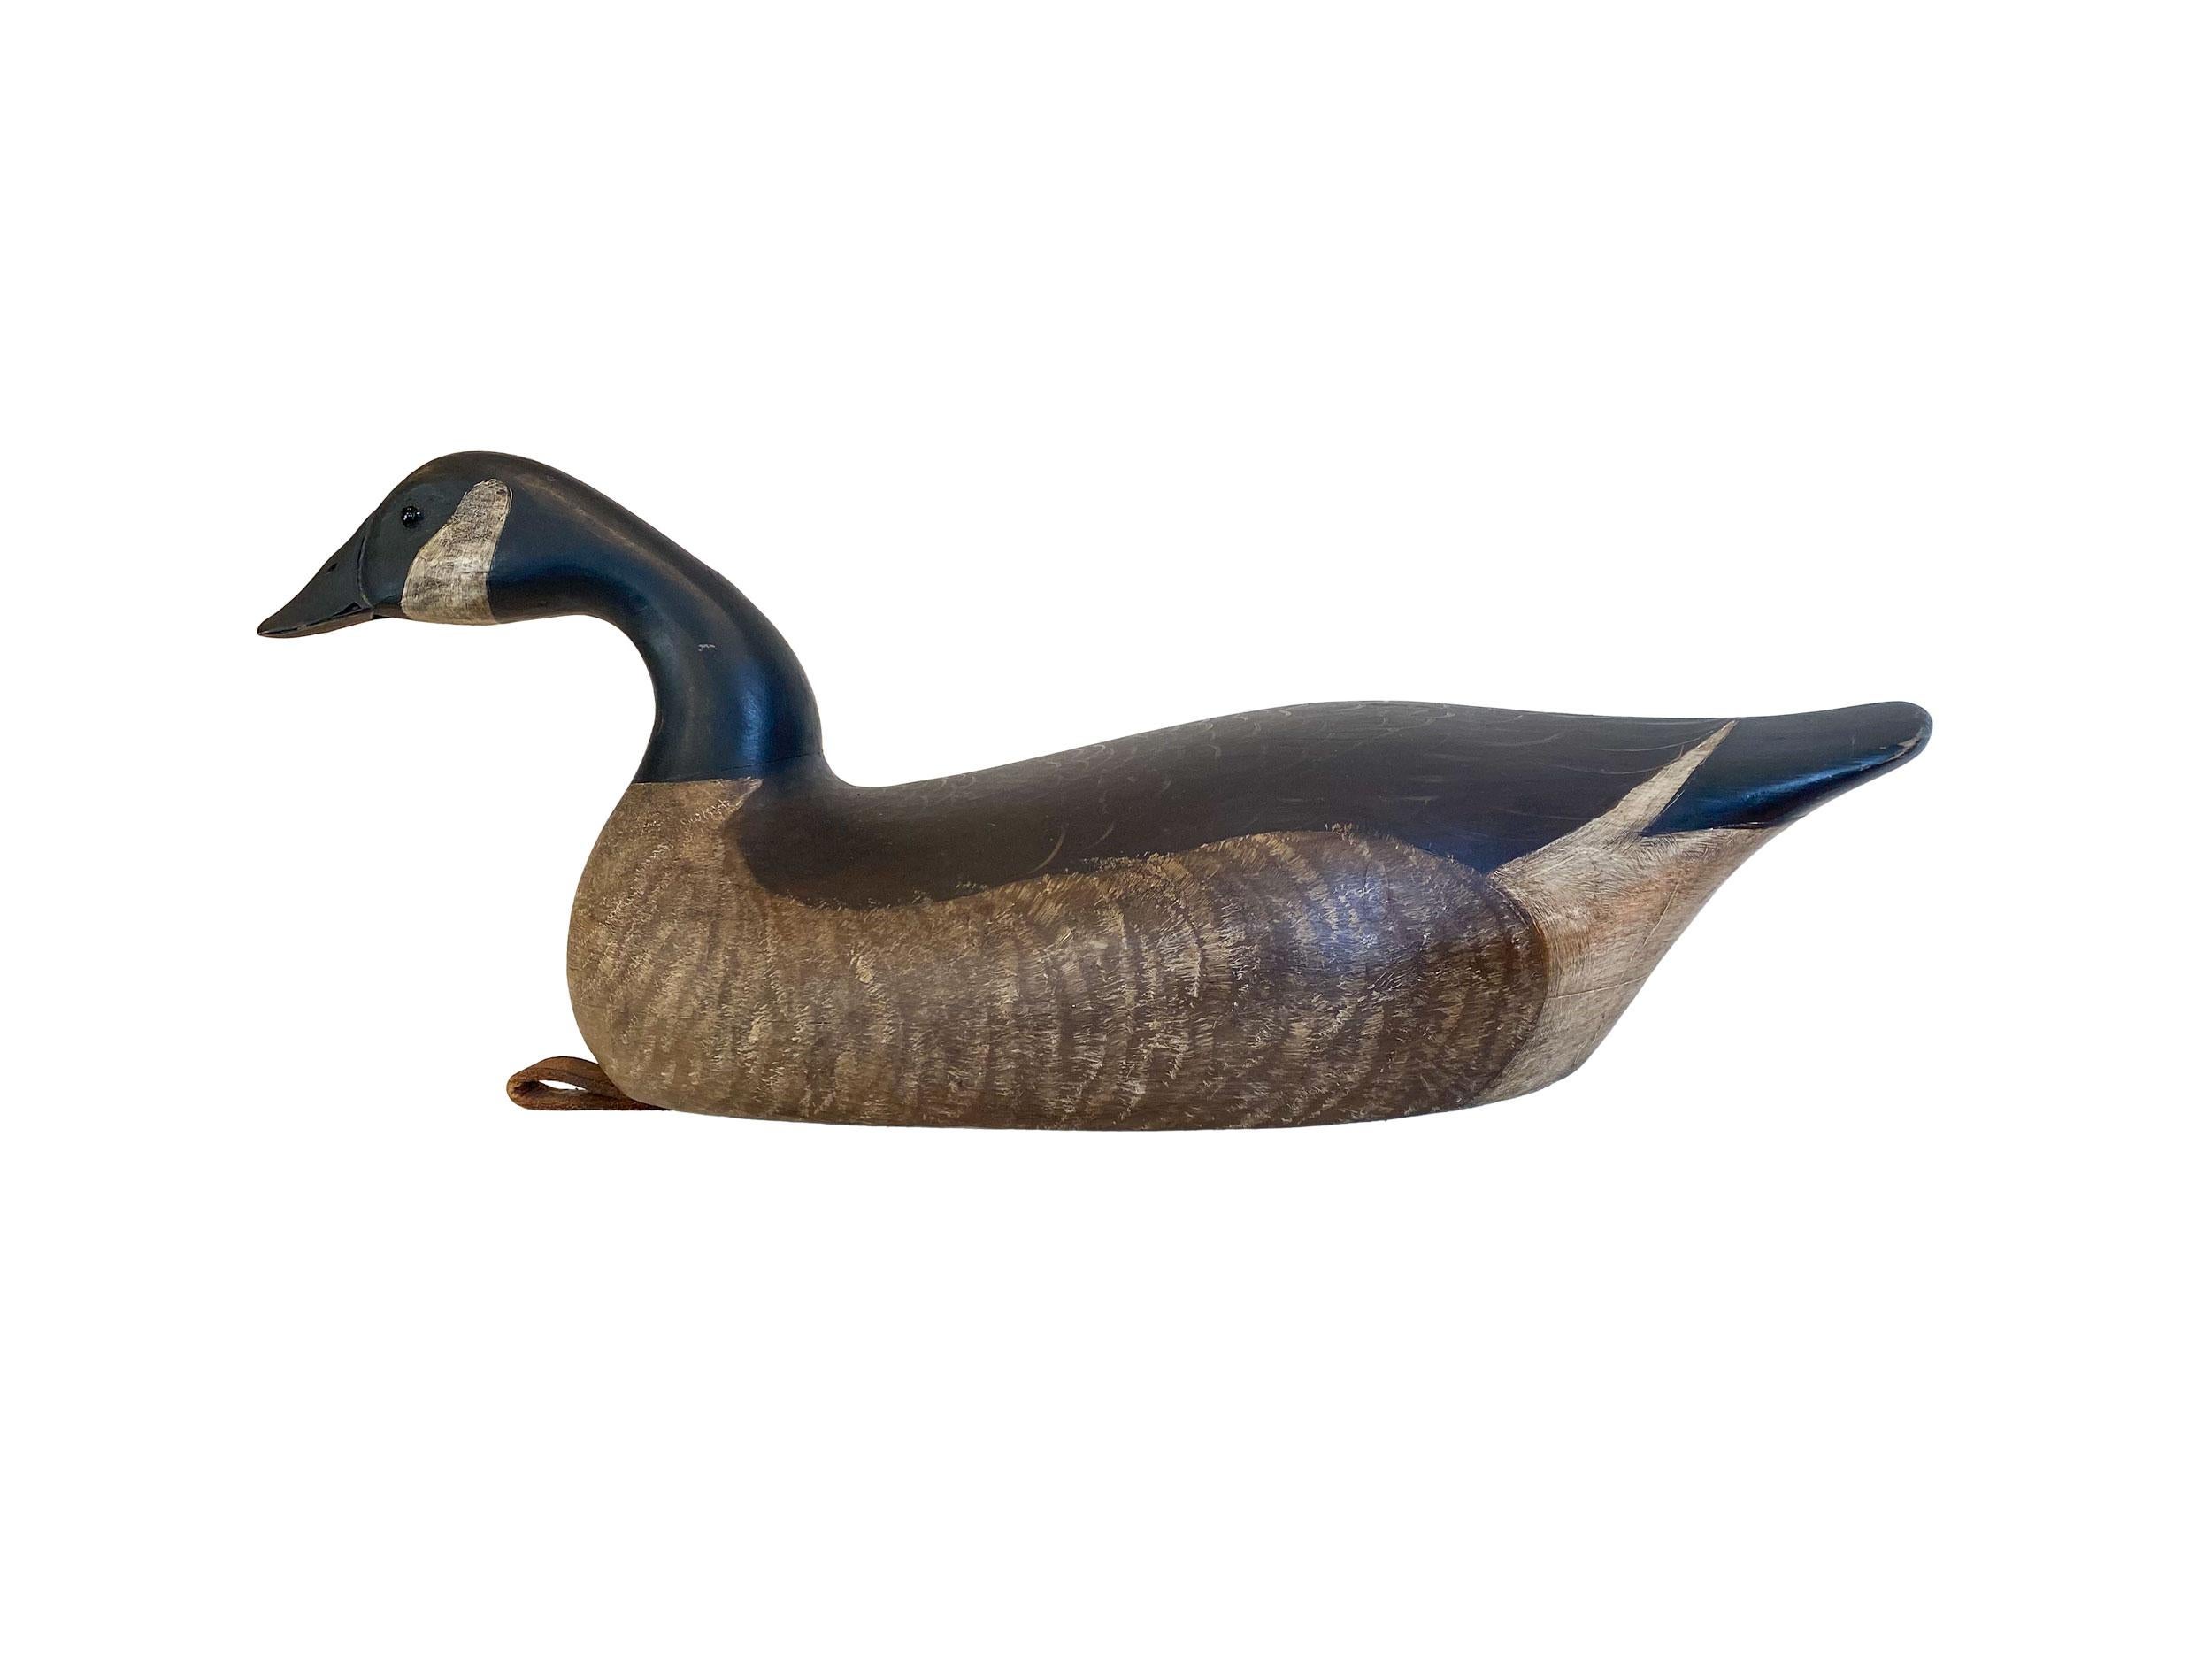 Canada swimming goose, hollow carved with glass eyes and lead plate
Signed/incised and titled on the bottom, 